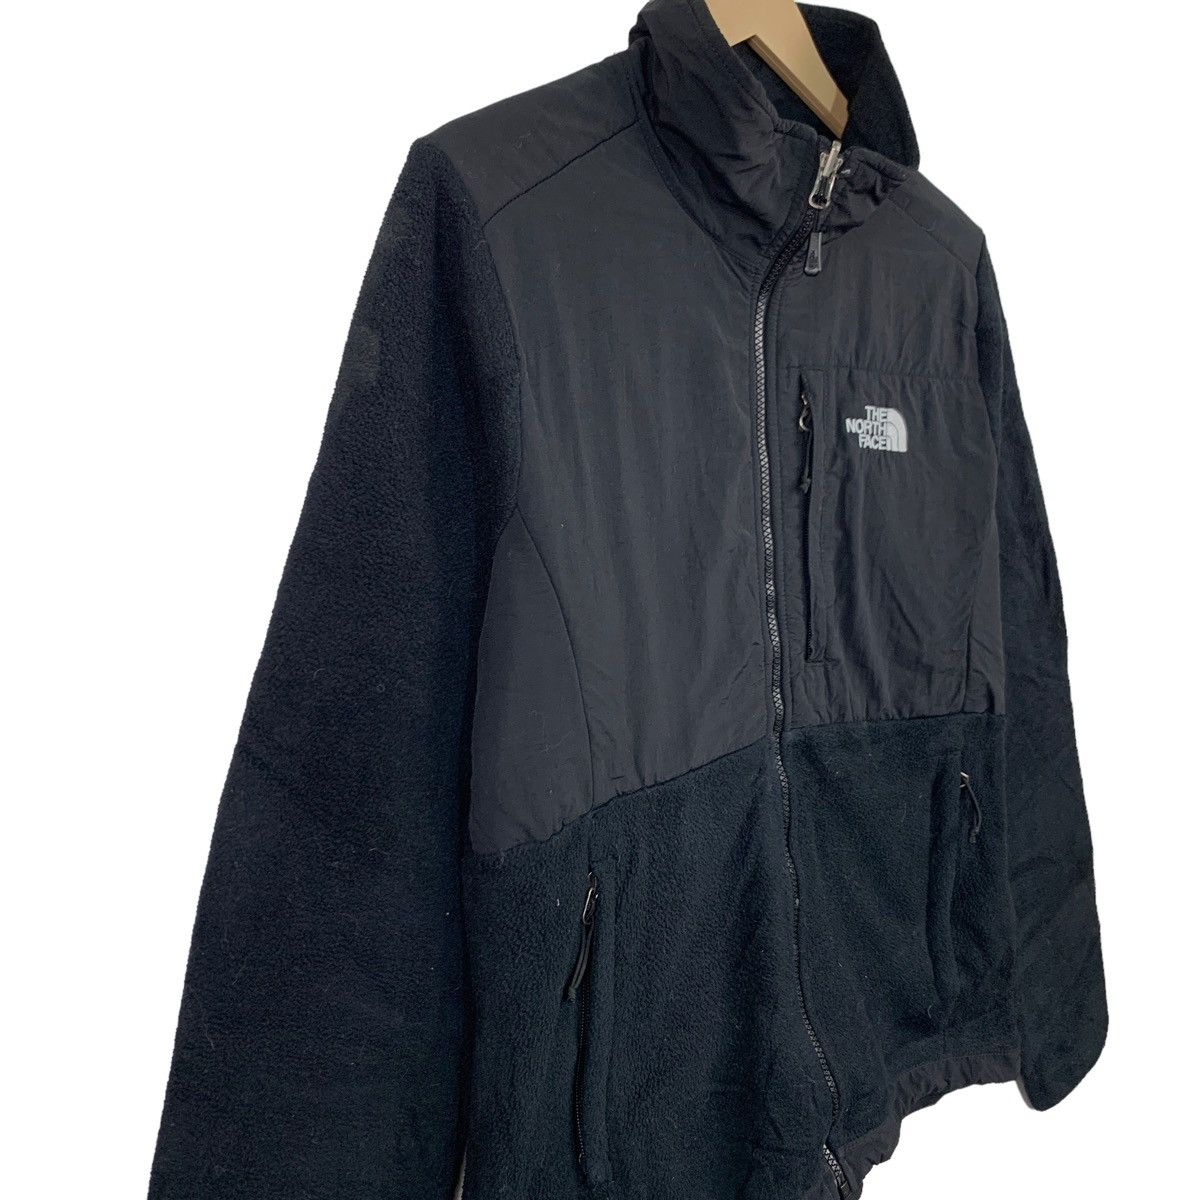 The North Face The North Face Flecee Jacket Polartec Black Size US S / EU 44-46 / 1 - 9 Preview